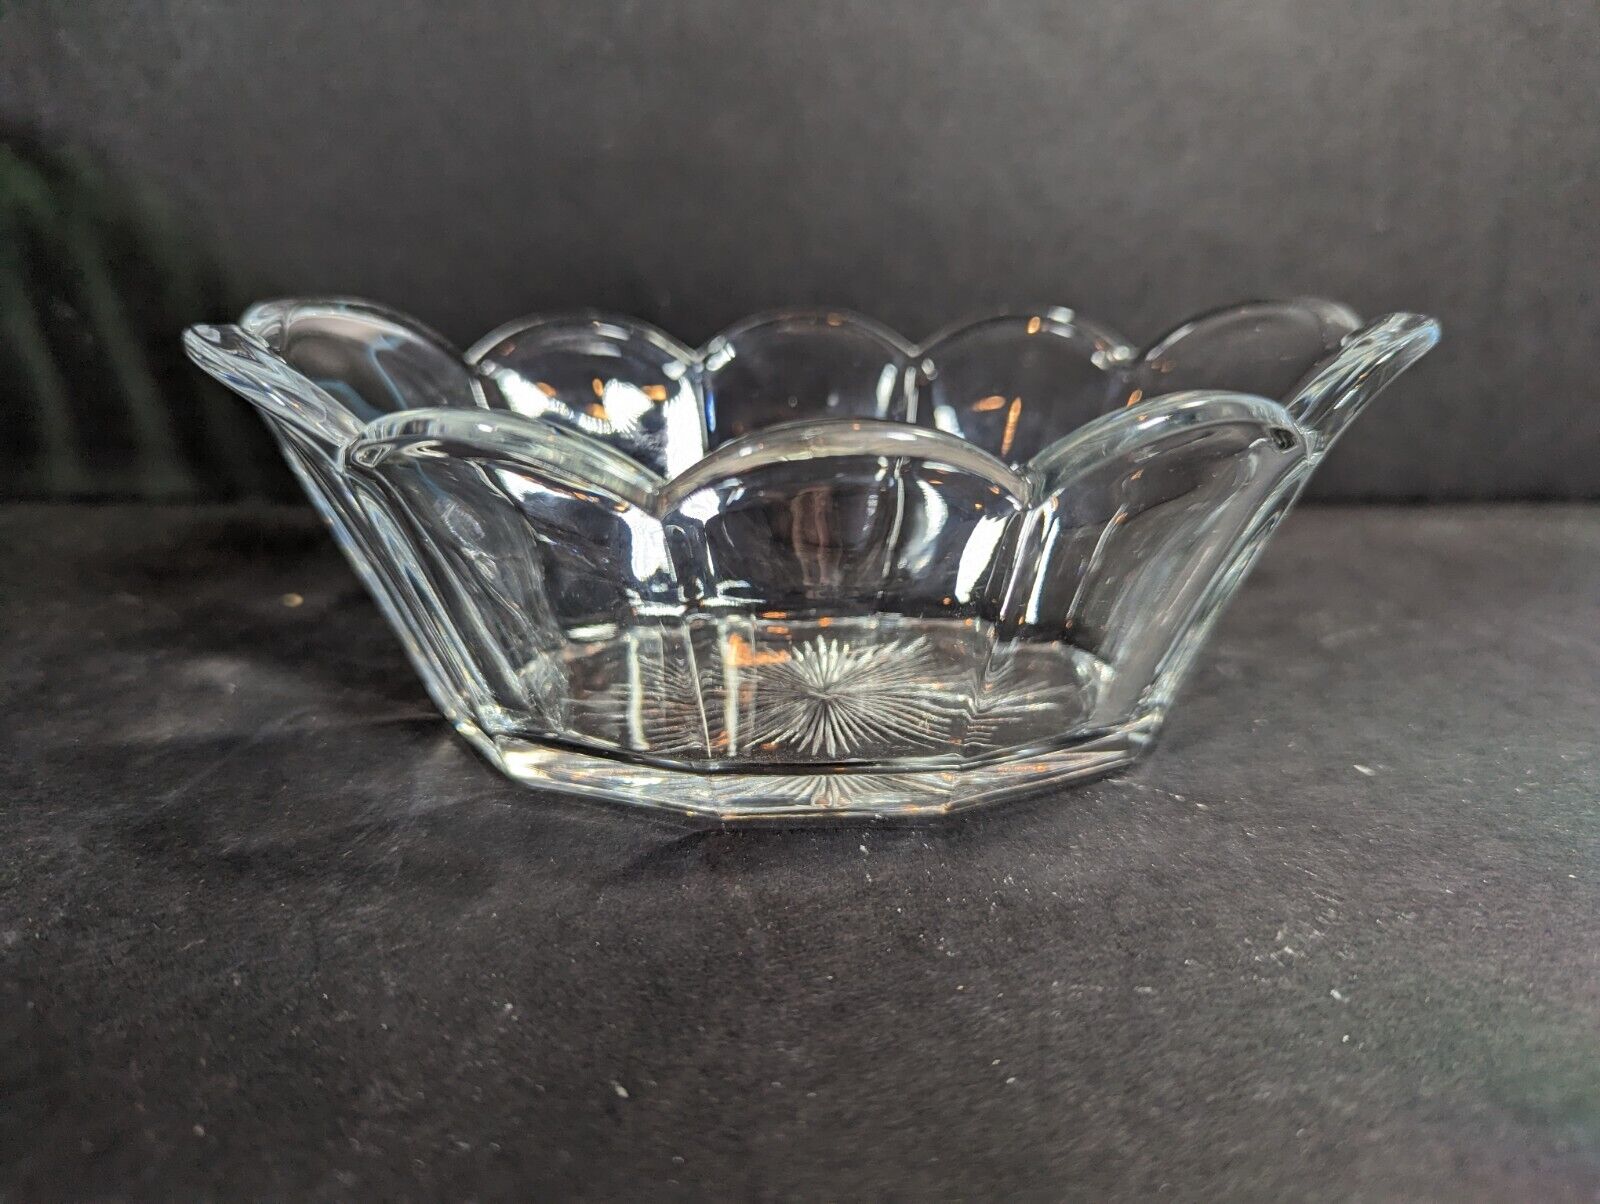 Vintage Heisey Crystal Bowls, 2 piece, 1920's glass Candy Dishes with Back Stamp